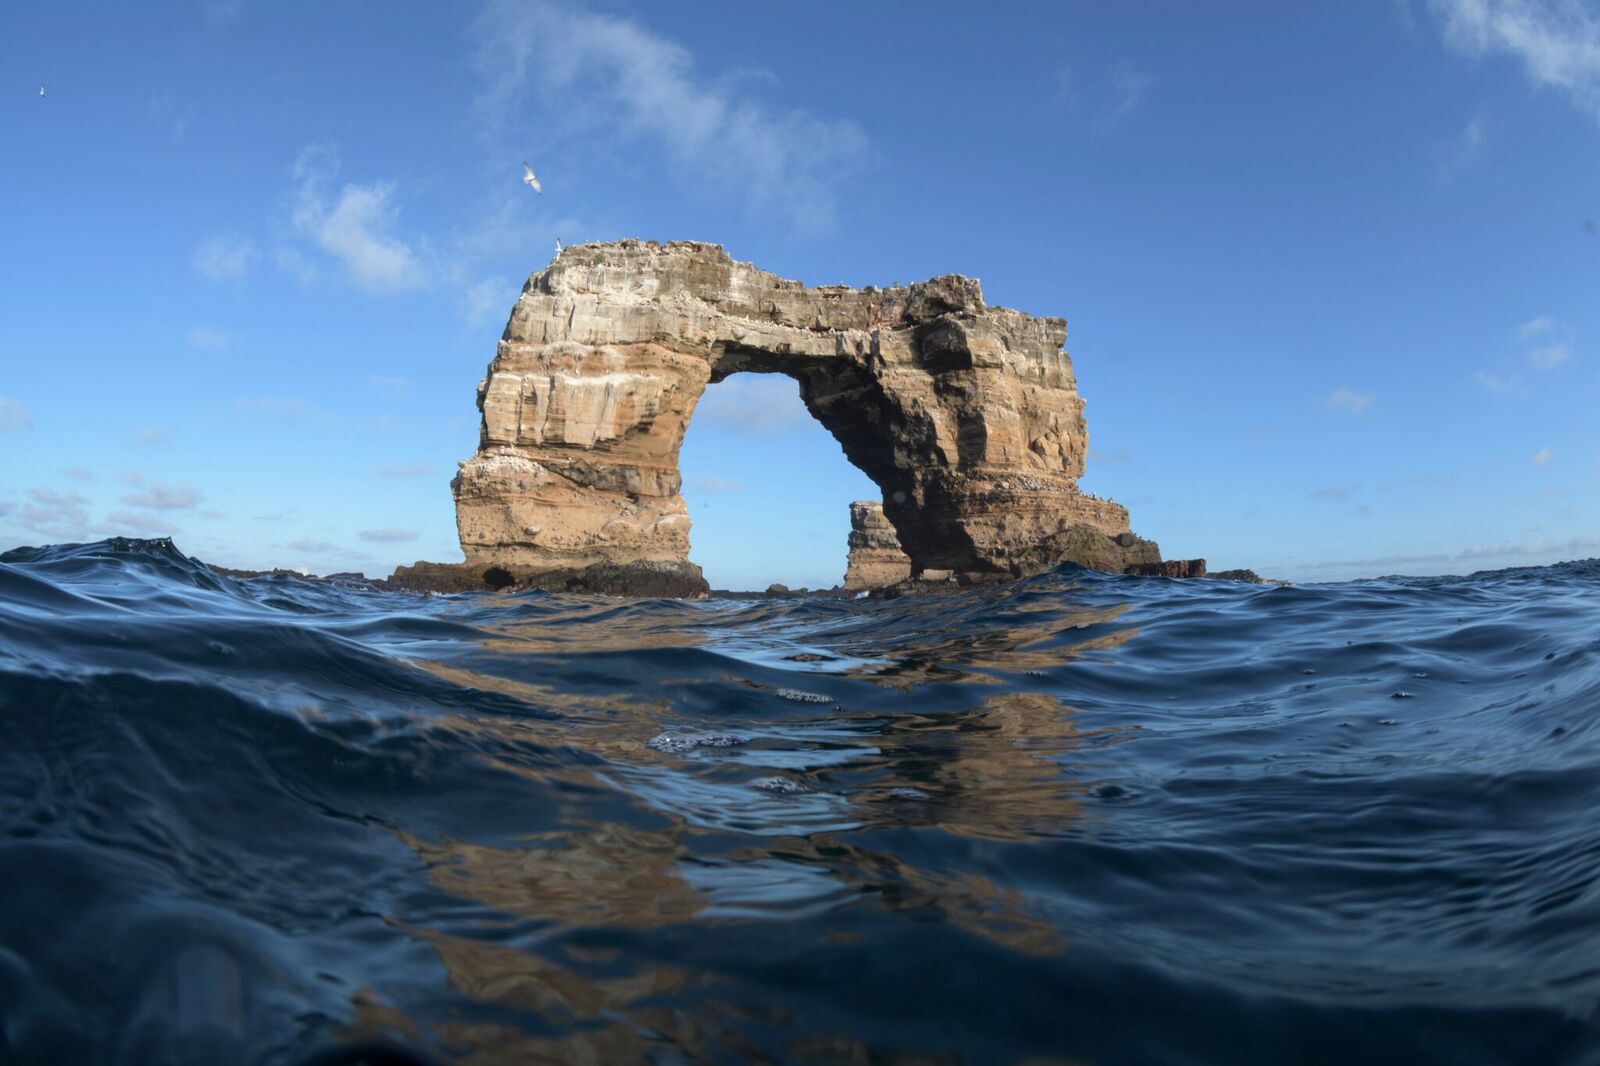 Scuba under Darwin's Arch in the Galapagos Islands